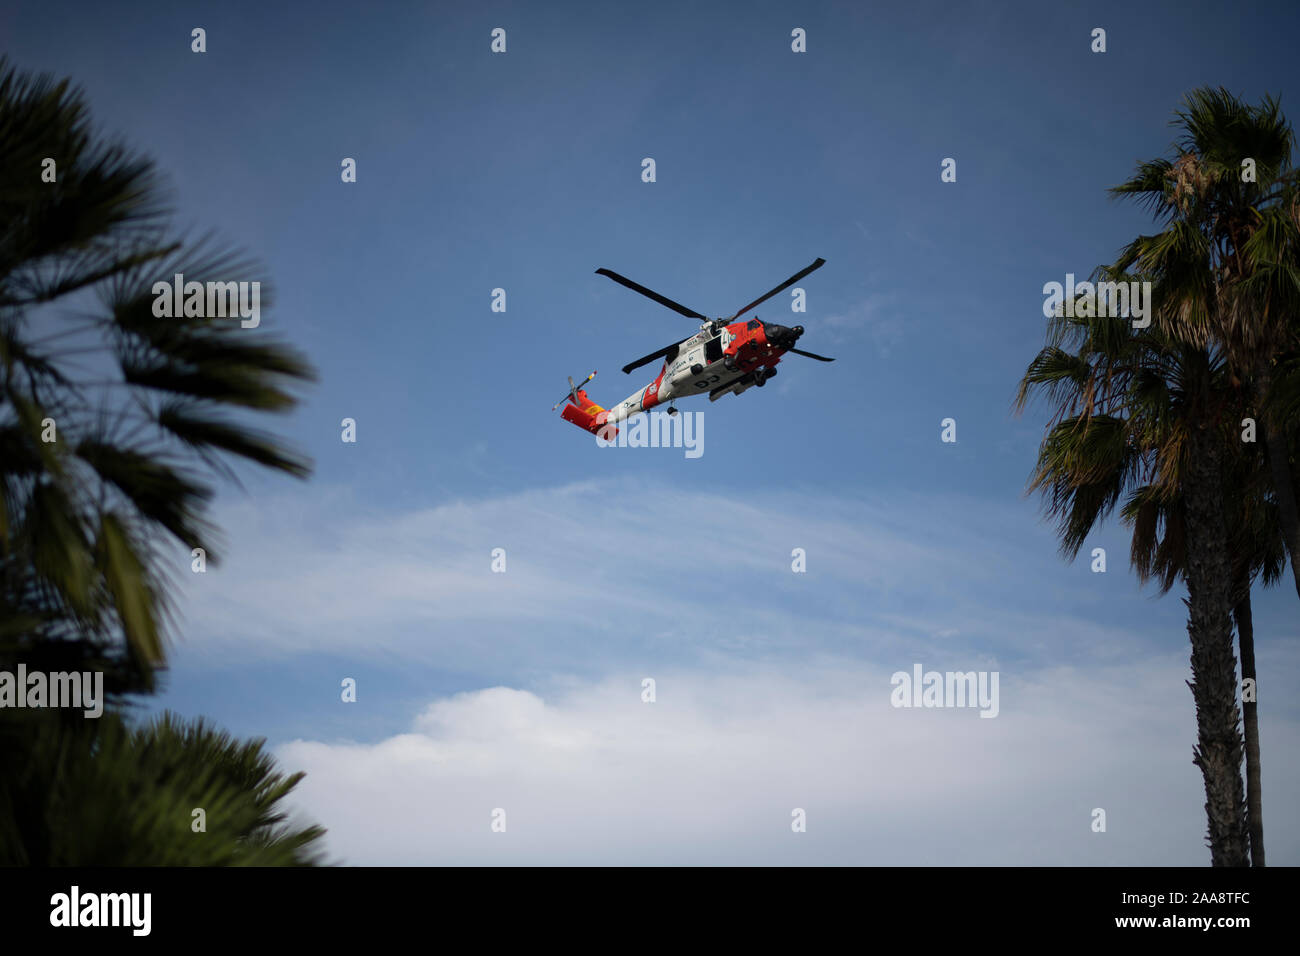 Coast Guard Helicopter flying ablove palm trees on a sunny day Stock Photo